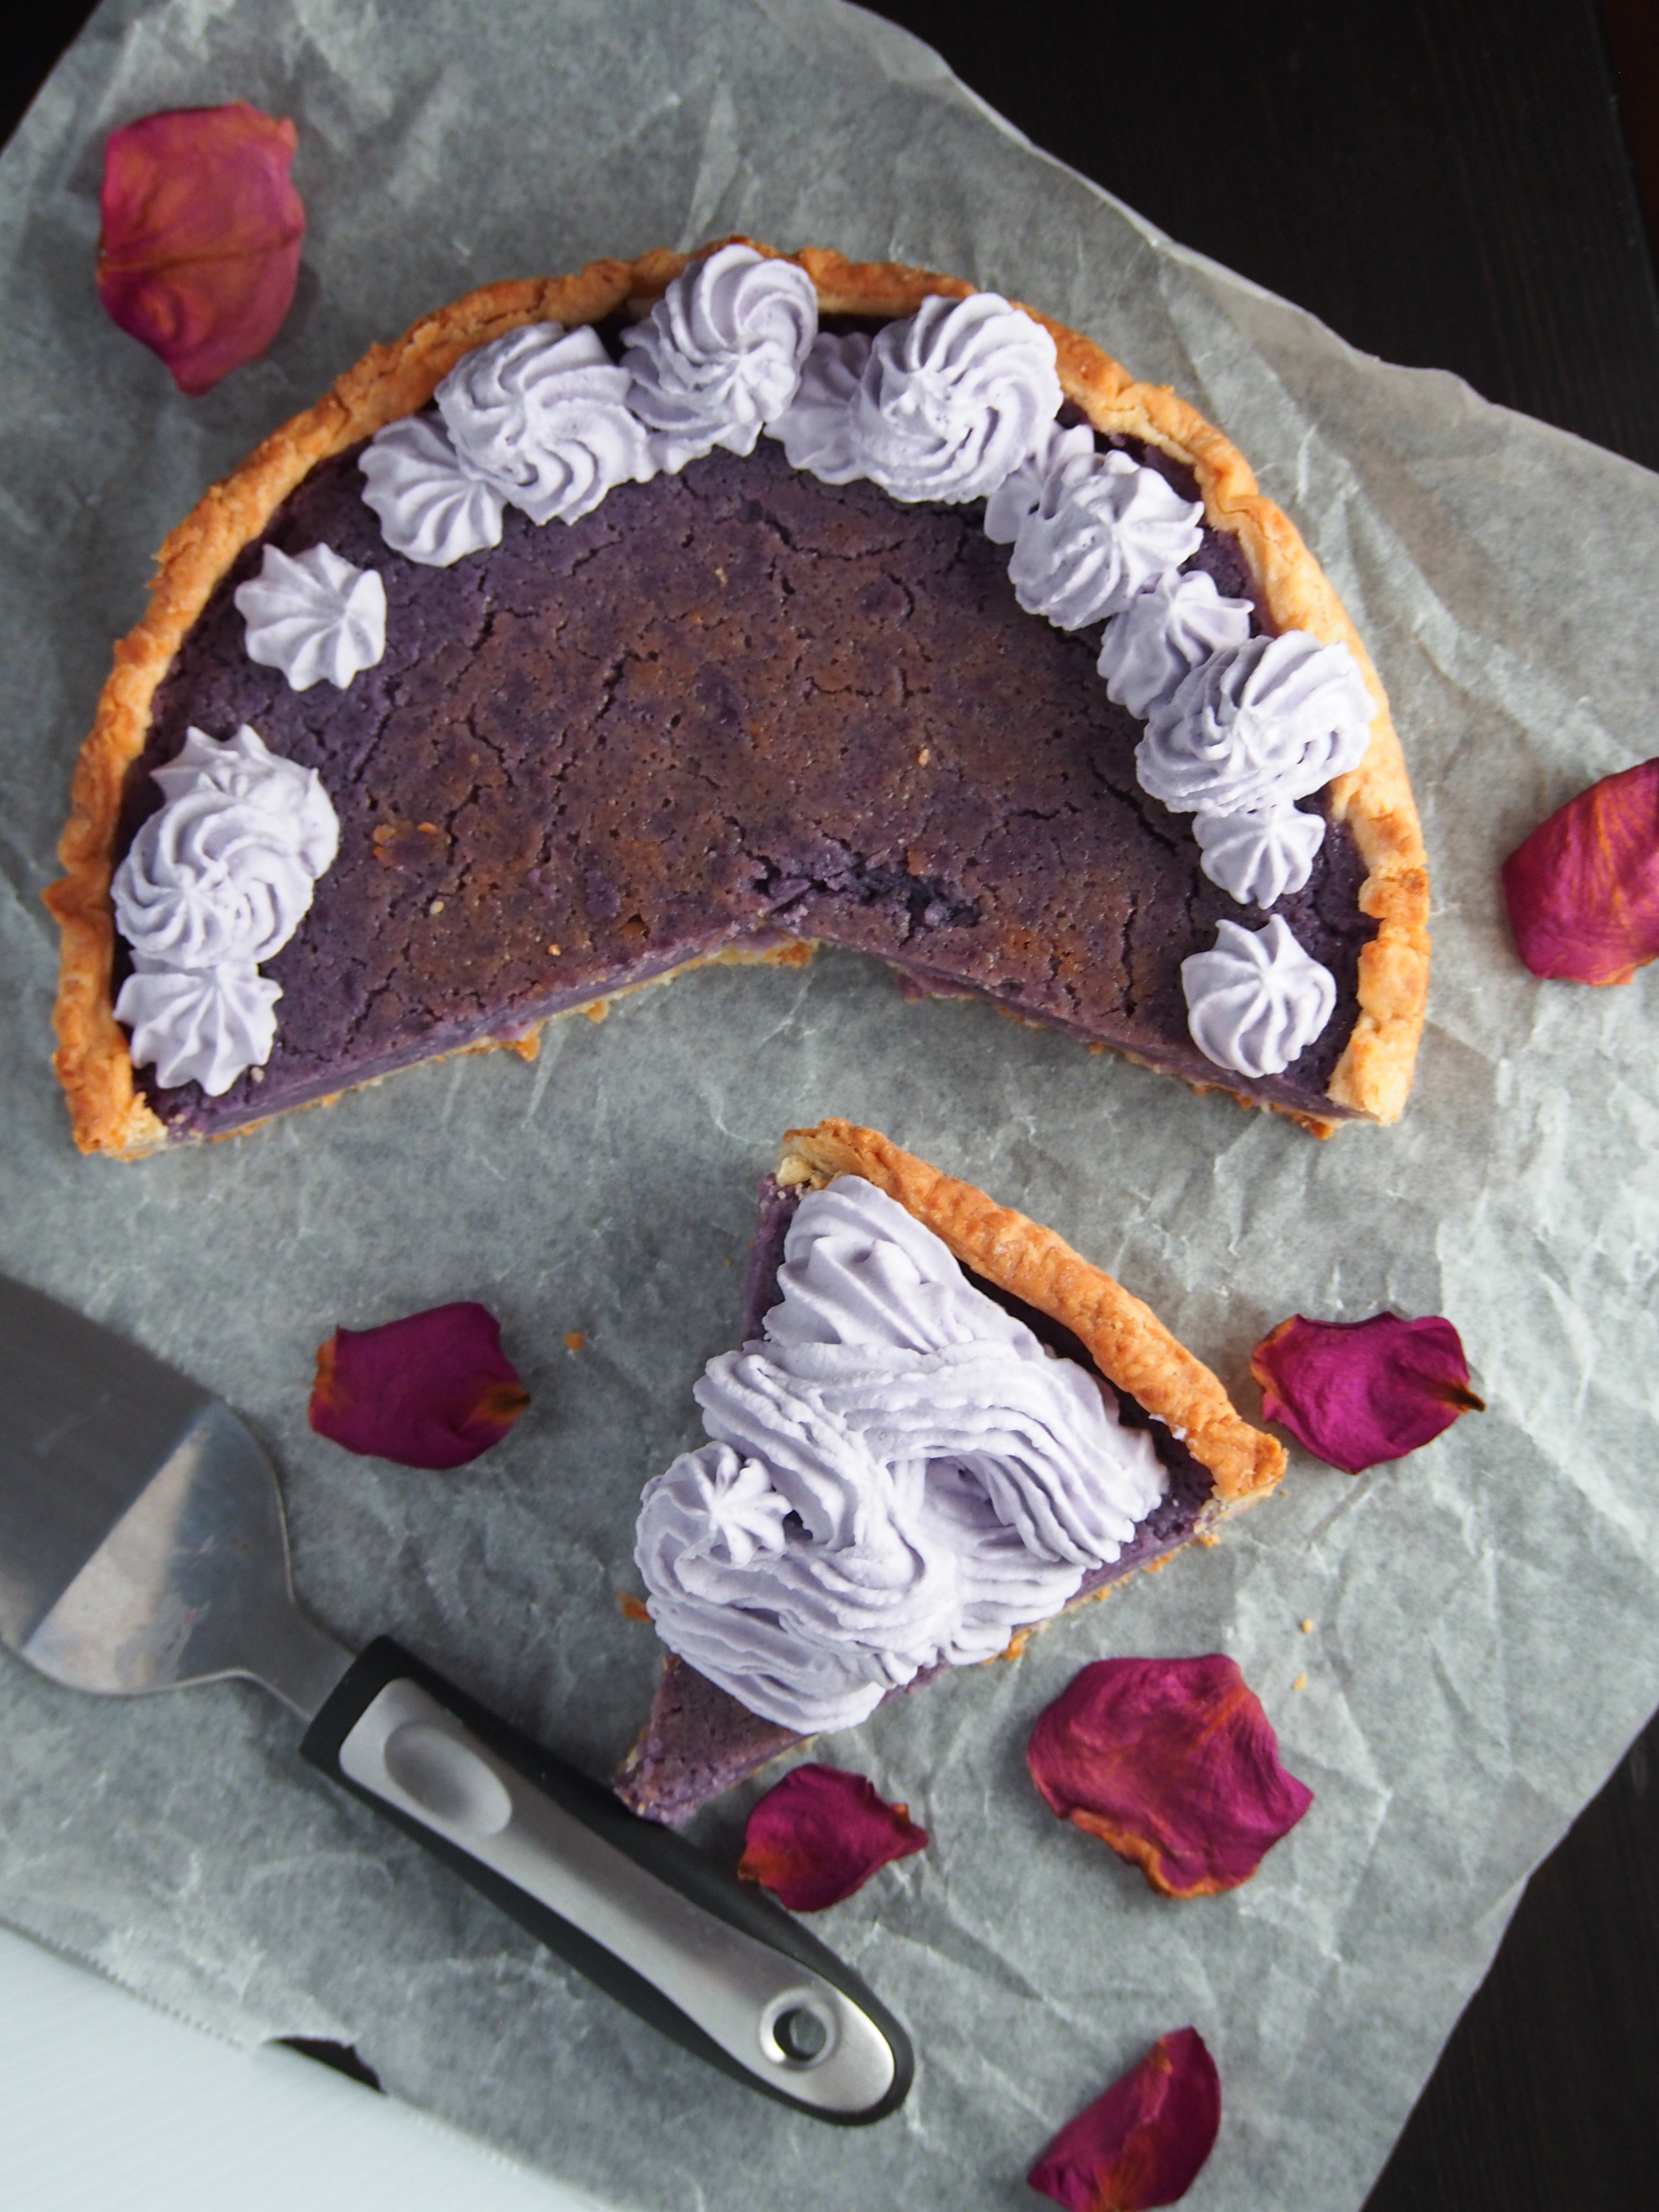 Ube desserts recipes. Simply delicious ube pie made of purple yam filling and neslted on a flaky cream cheese pie crust.